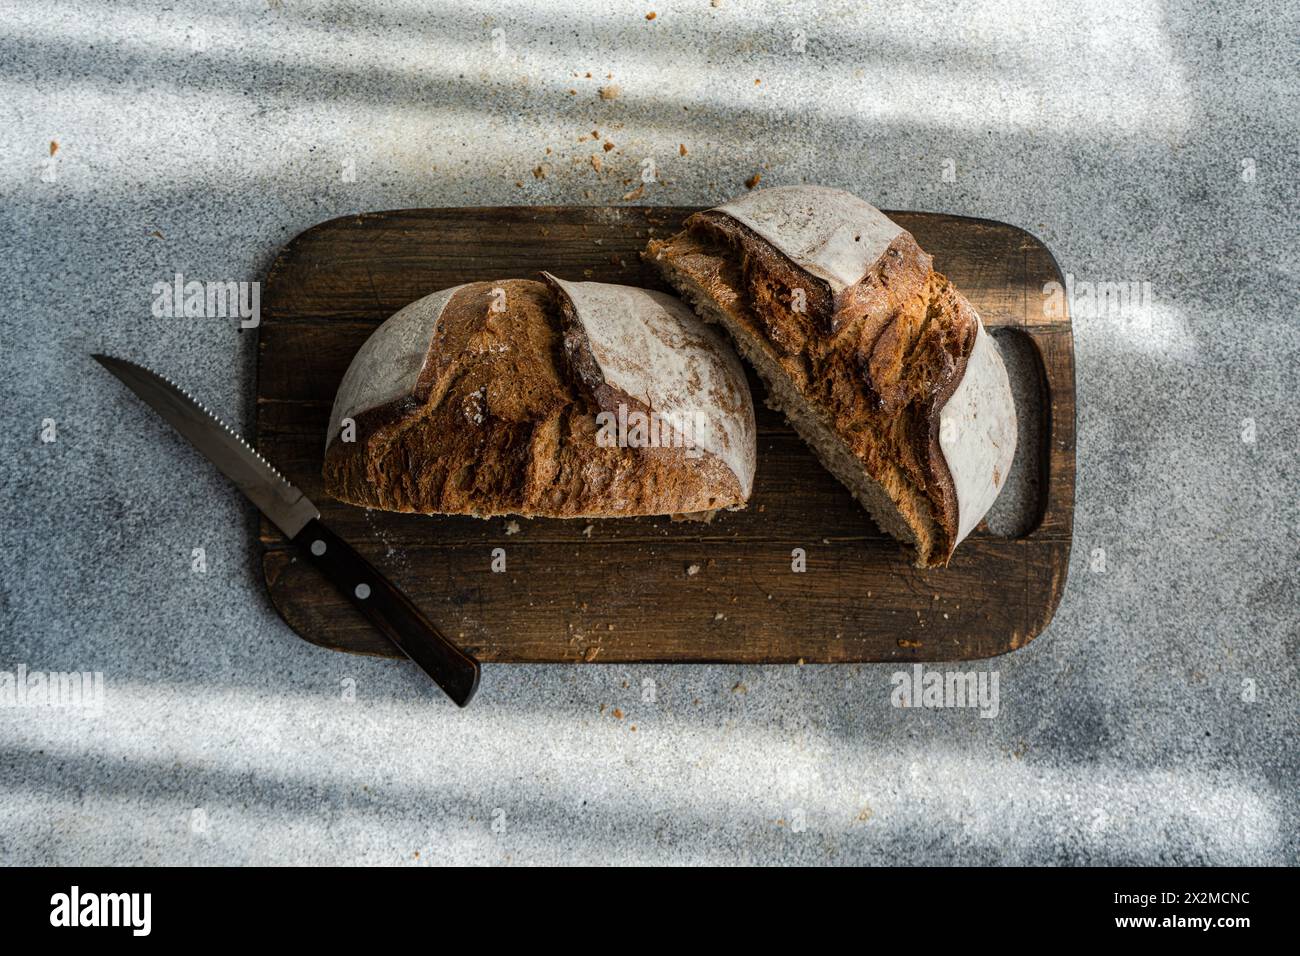 Sliced wholesome rye sourdough bread on a rustic wooden cutting board next to a serrated knife, with natural light casting shadows Stock Photo